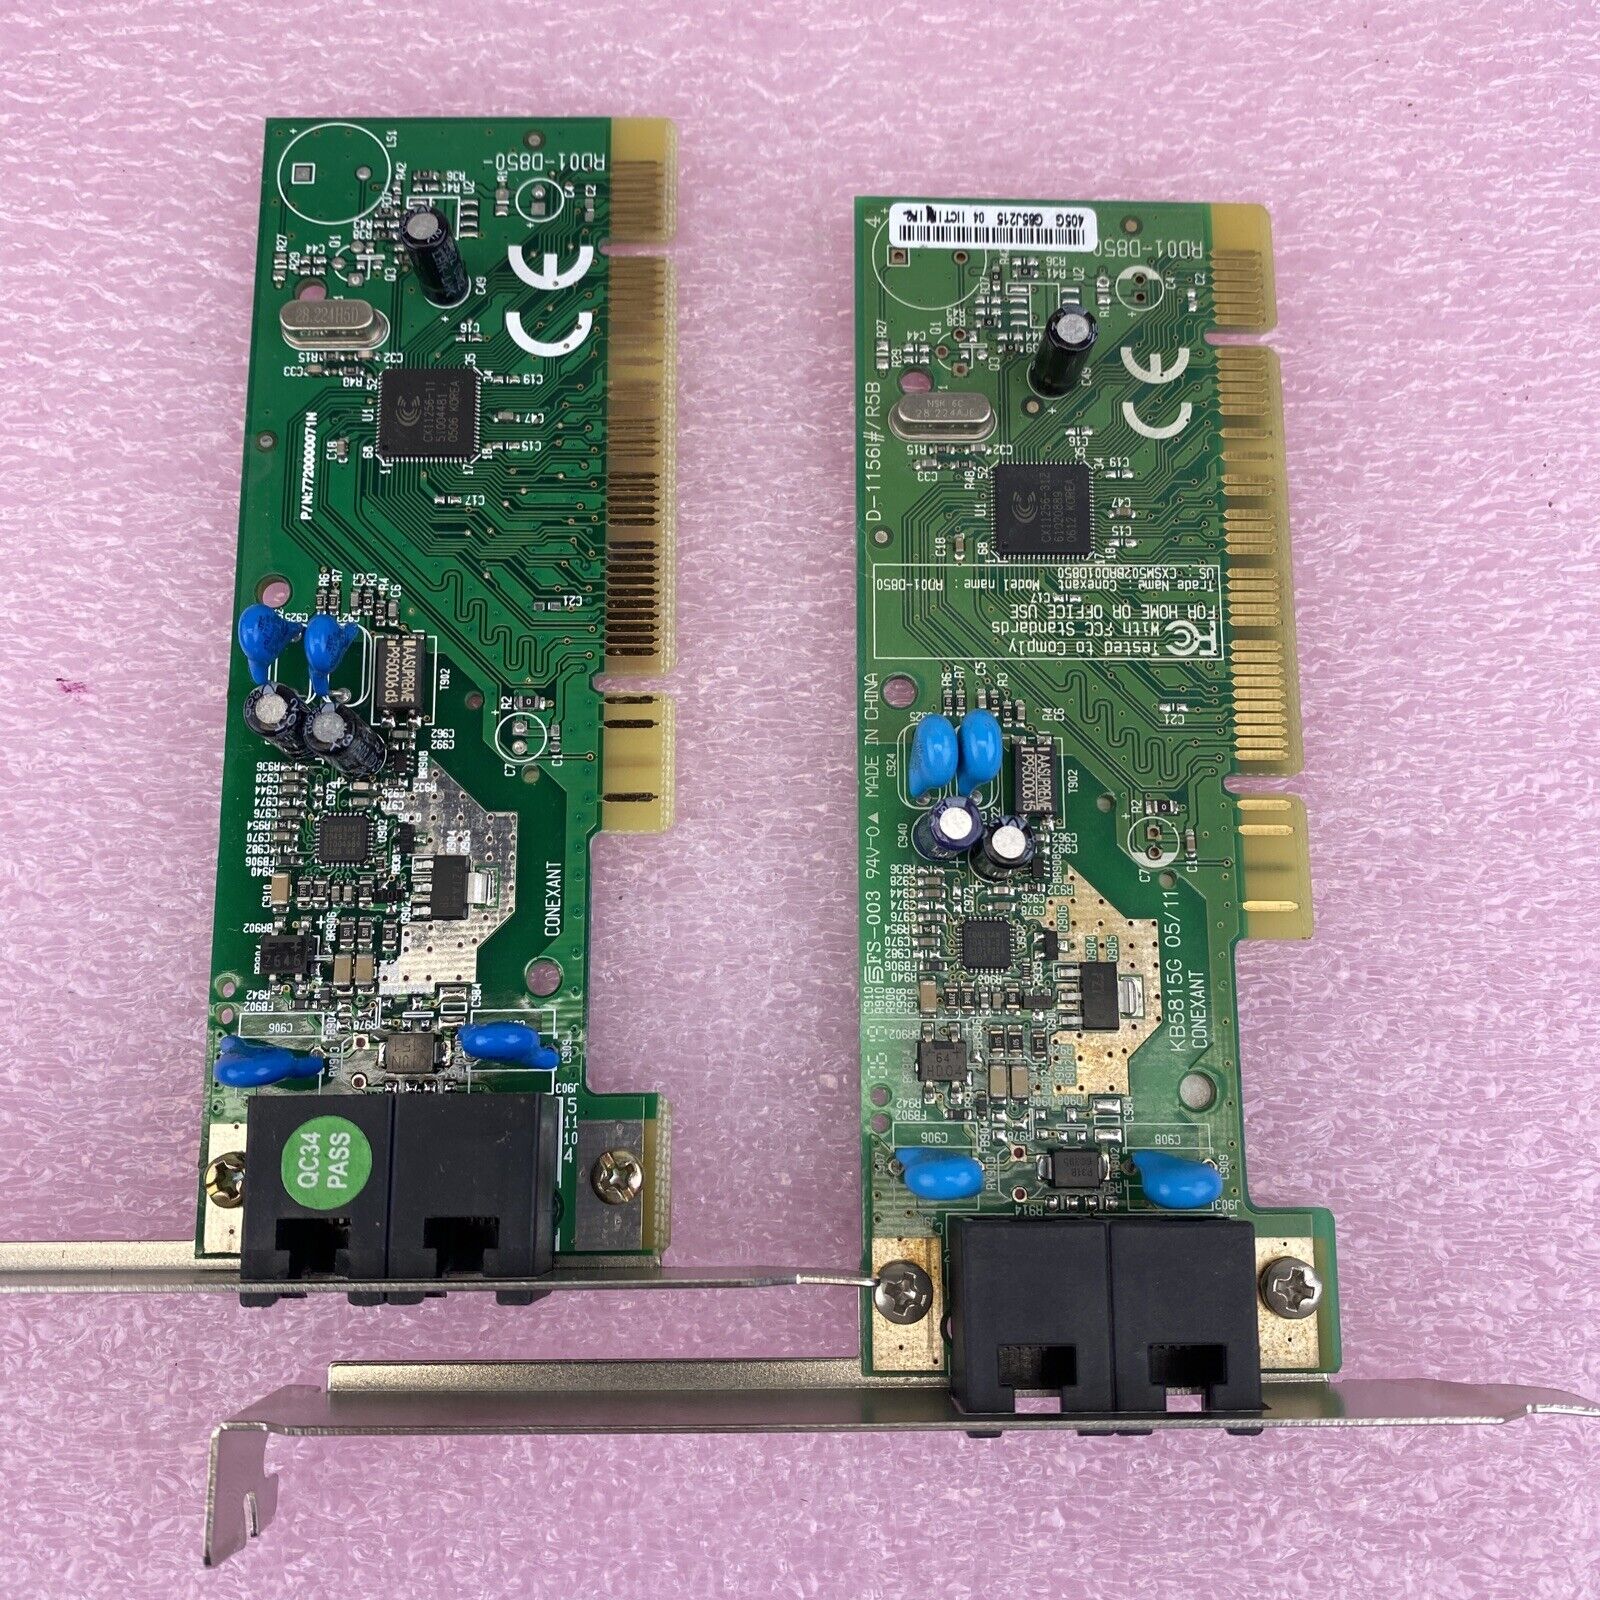 Anatel Conexant 56k Data Fax Modem RD01-D850 Full Height PCI Card Lot of 2